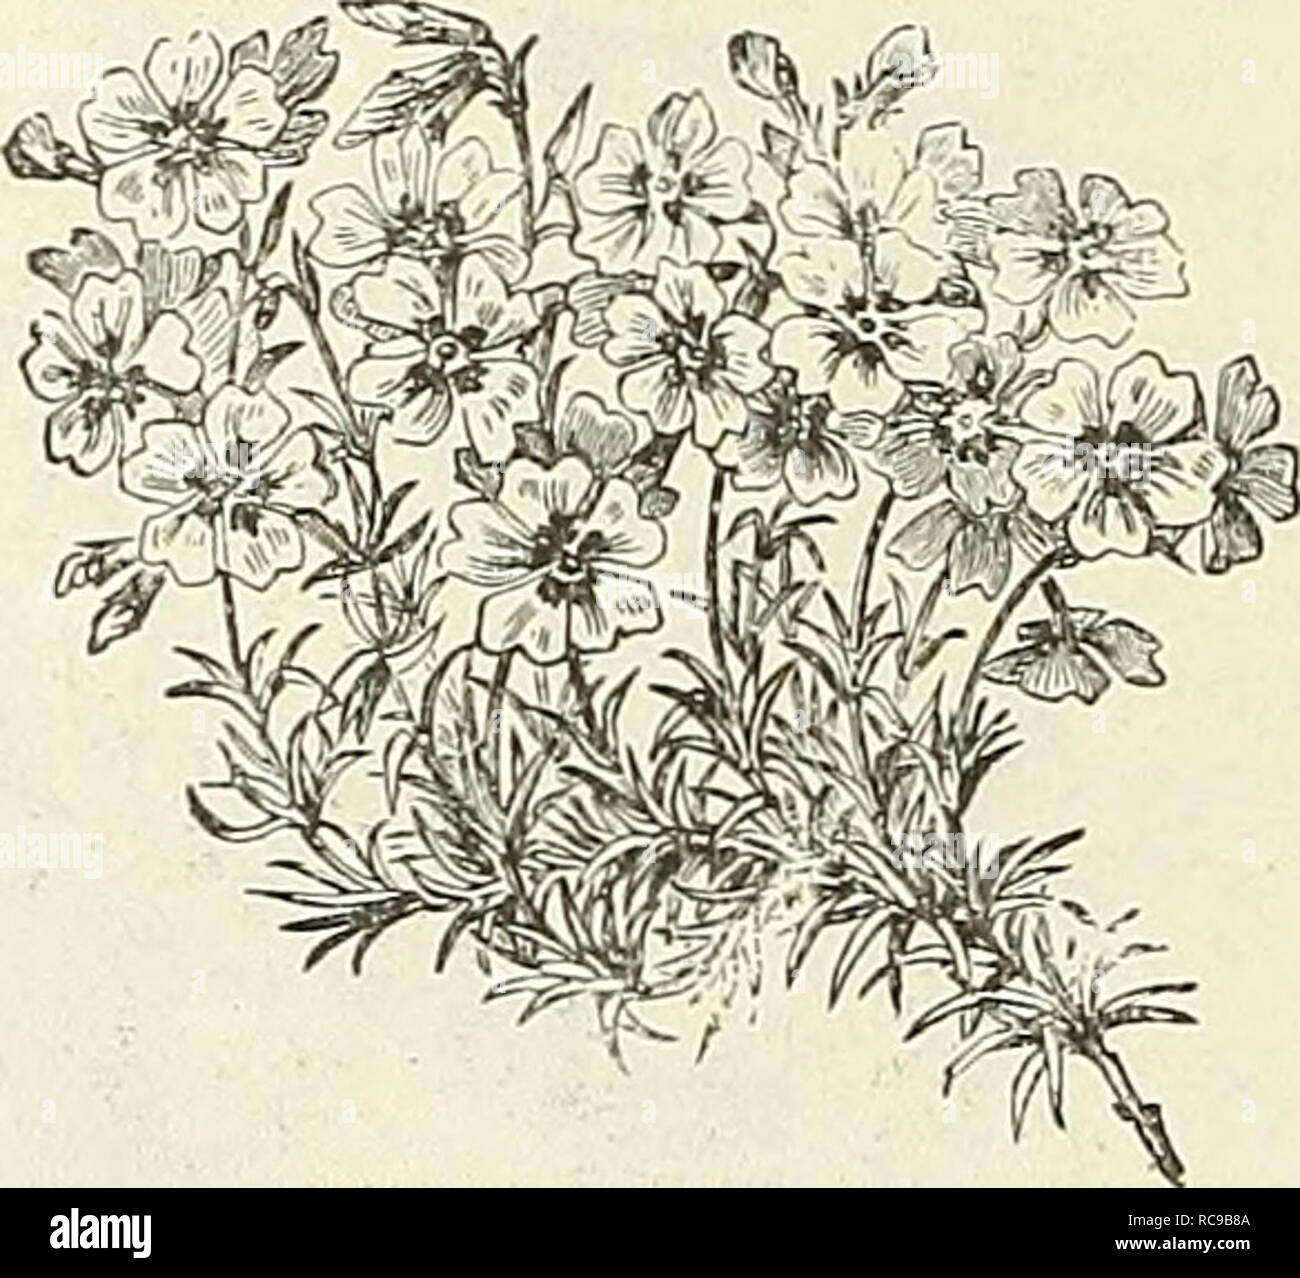 . Dreer's garden book : 1904. Seeds Catalogs; Nursery stock Catalogs; Gardening Equipment and supplies Catalogs; Flowers Seeds Catalogs; Vegetables Seeds Catalogs; Fruit Seeds Catalogs. Phlox Subulata. Hardy Phlox Pantheon. PHI.OX SUBFLATA. (Moss, or nrouiitain Pink.) An early s| ring-fluwermg ty| e, widi pretty moss-like evergreen foliage, which, during the flowering season, is hidden under the masses of bloom. An excellent plant for tfee rockery, the border, and invaluable for car- peting the ground or covering graves. (See cut.) We offer five varieties. Lilacina. Light lilac. NelSOni. Pure  Stock Photo